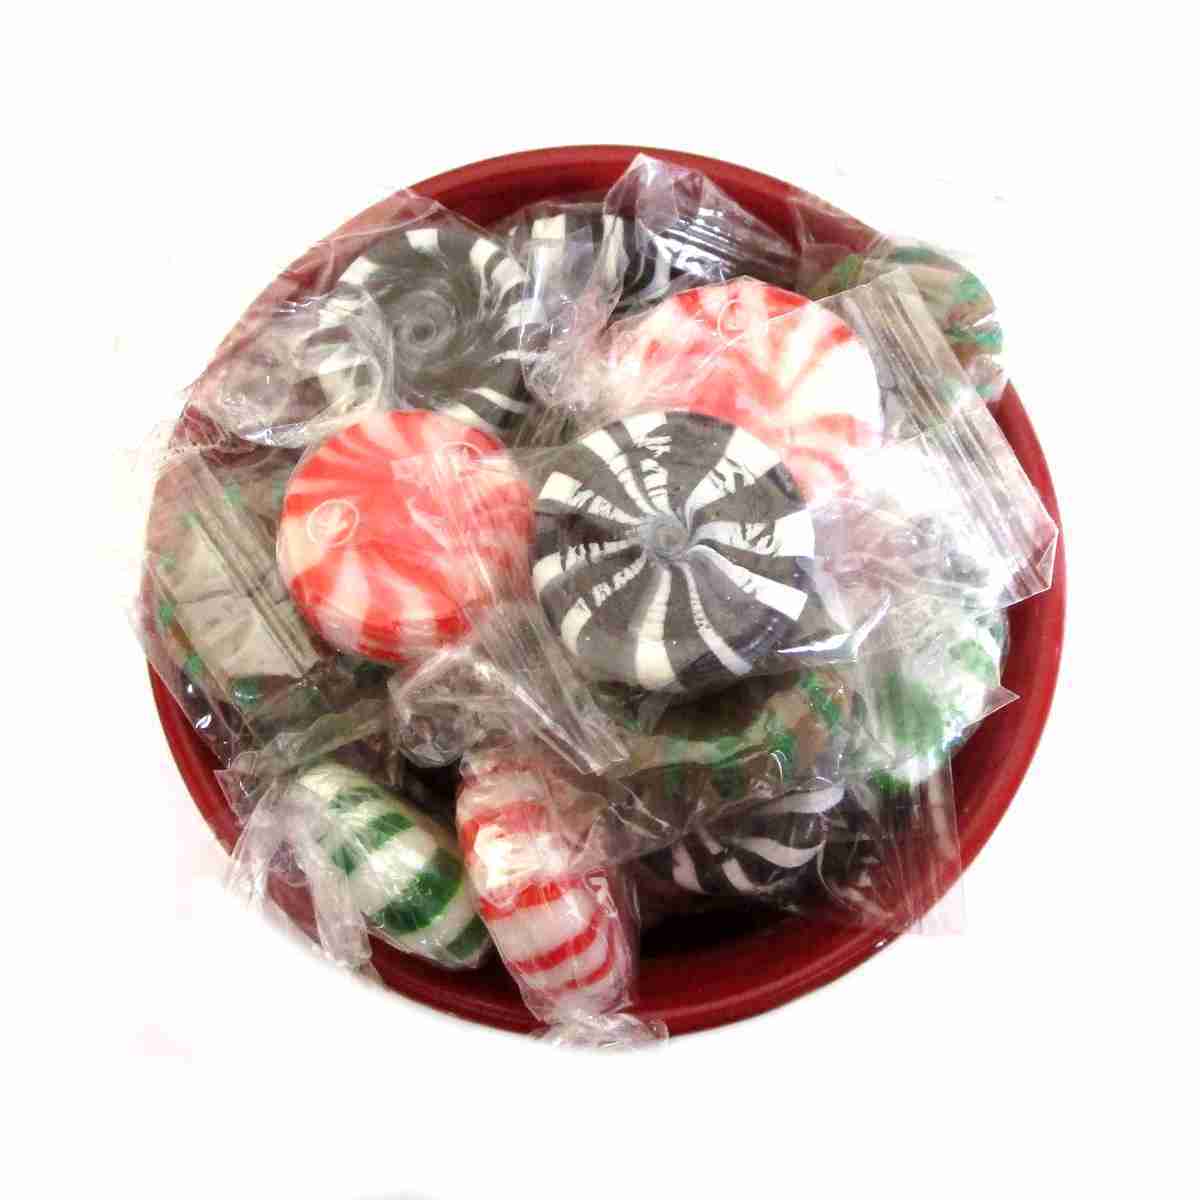 Assorted Starlight Mints Bulk Wrapped Candy 4 Lbs. Starlite Mints 5 Flavors - $19.97